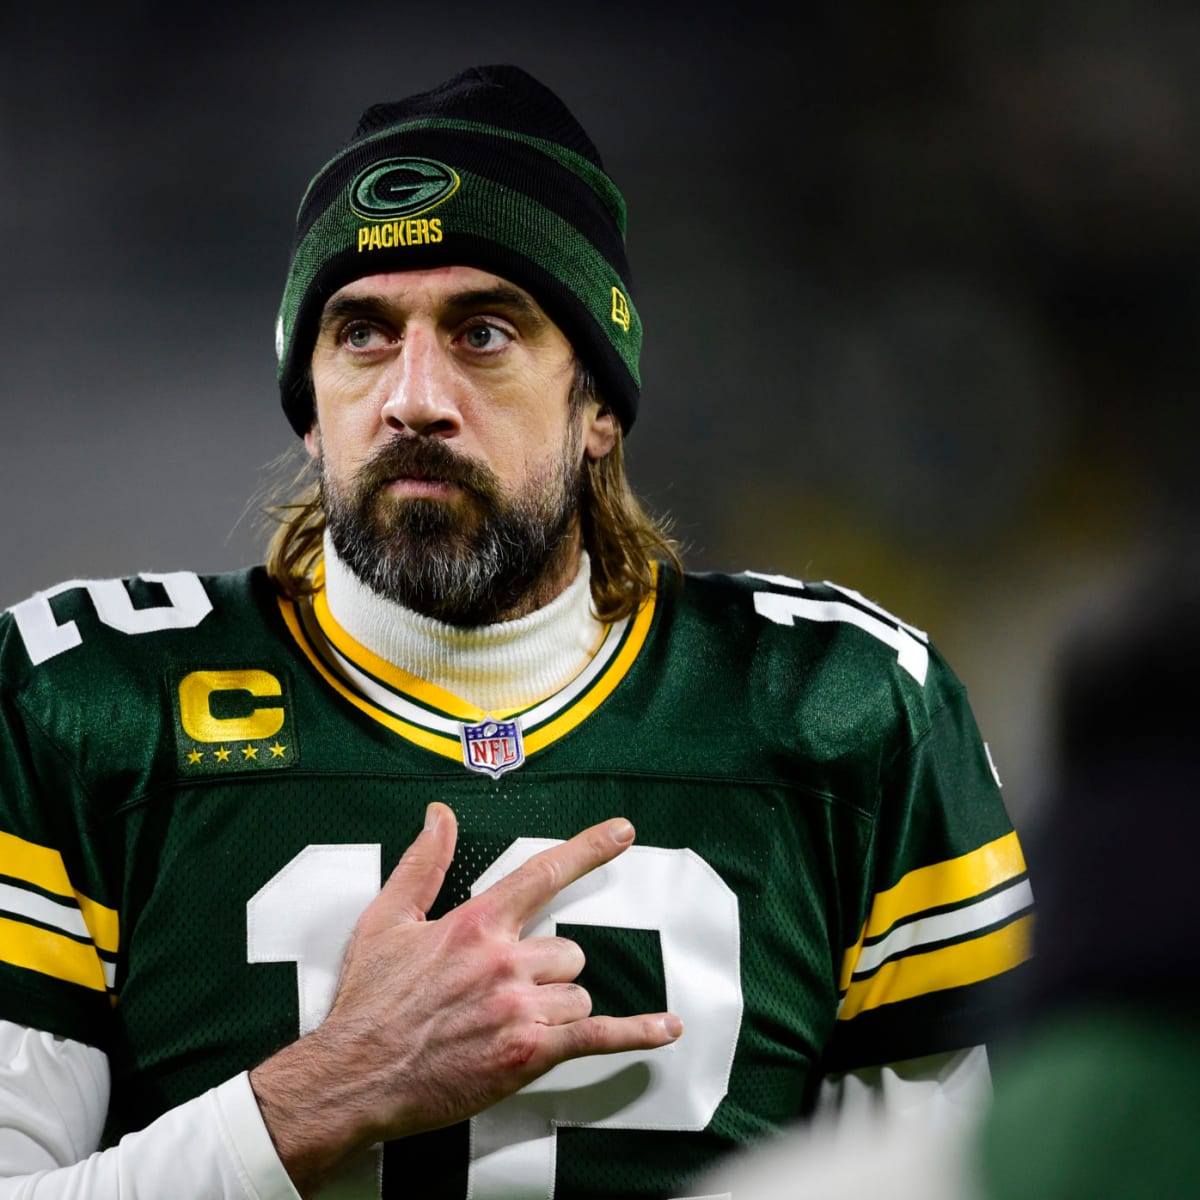 NFL Fans React To The Packers Retiring Aaron Rodgers' Number - The